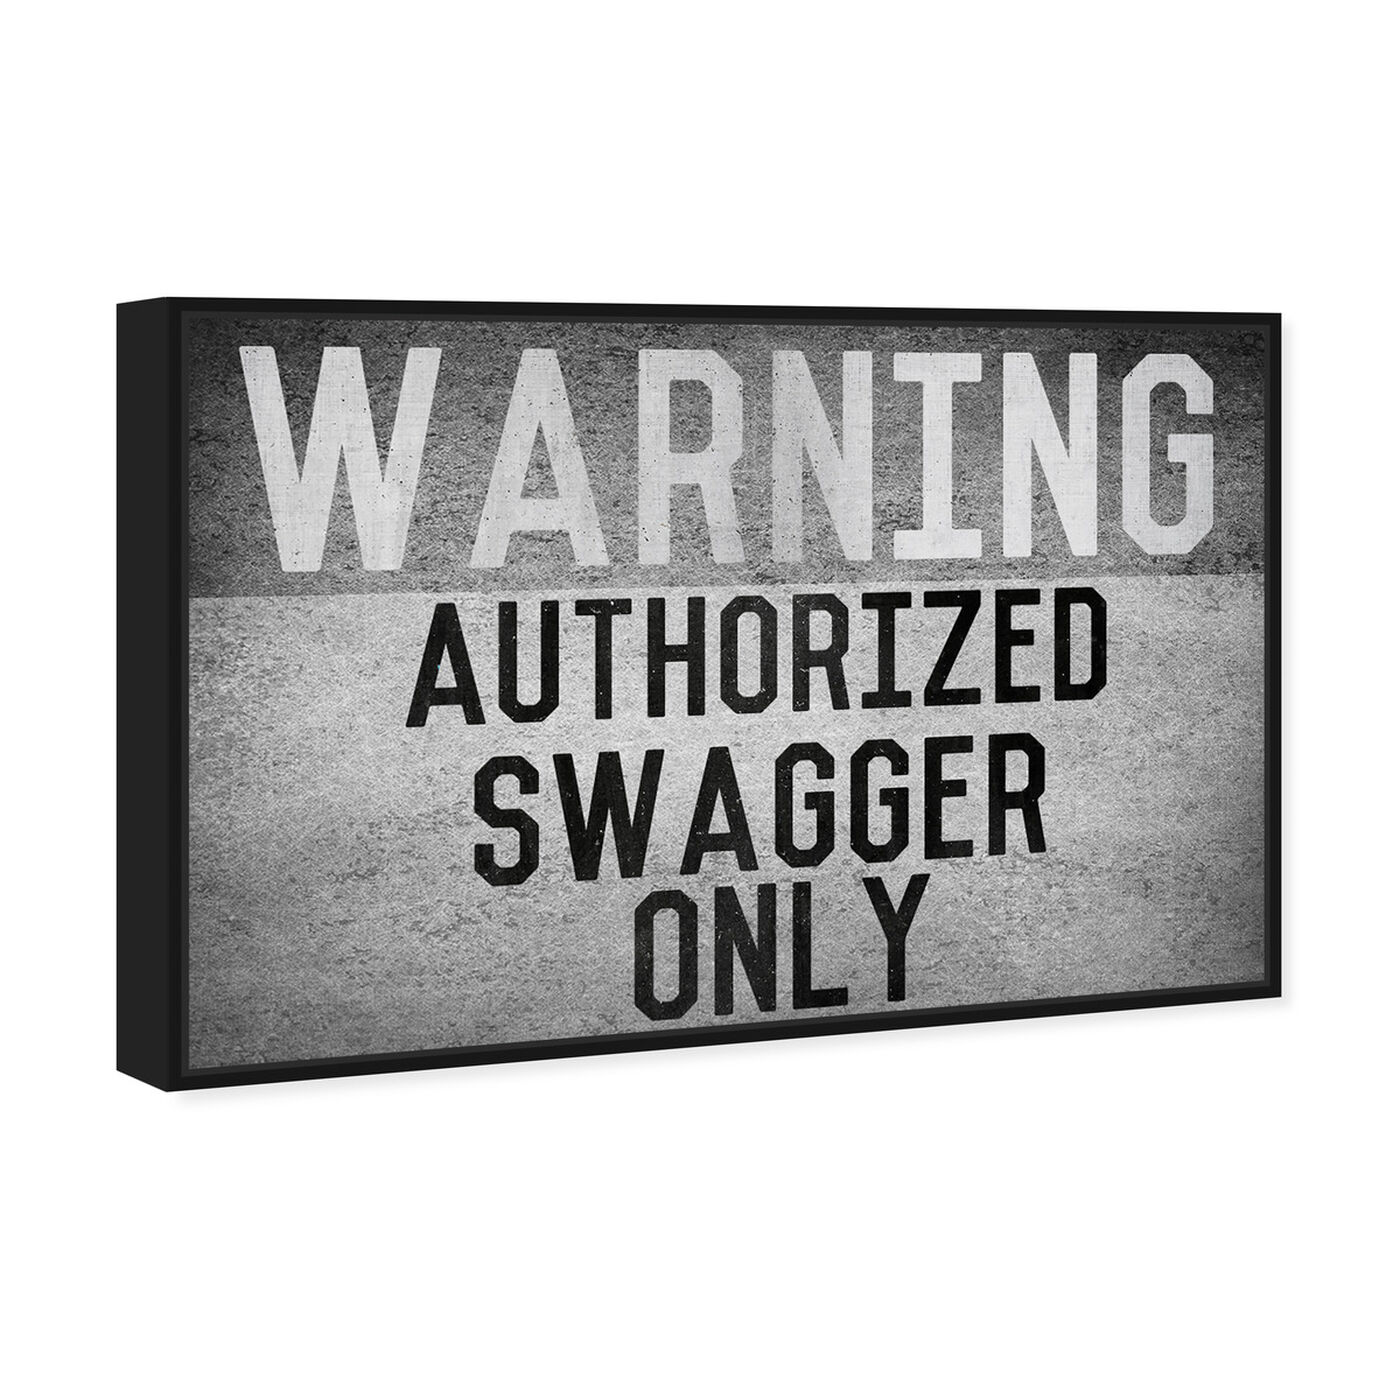 Angled view of Swagger Overload featuring typography and quotes and funny quotes and sayings art.